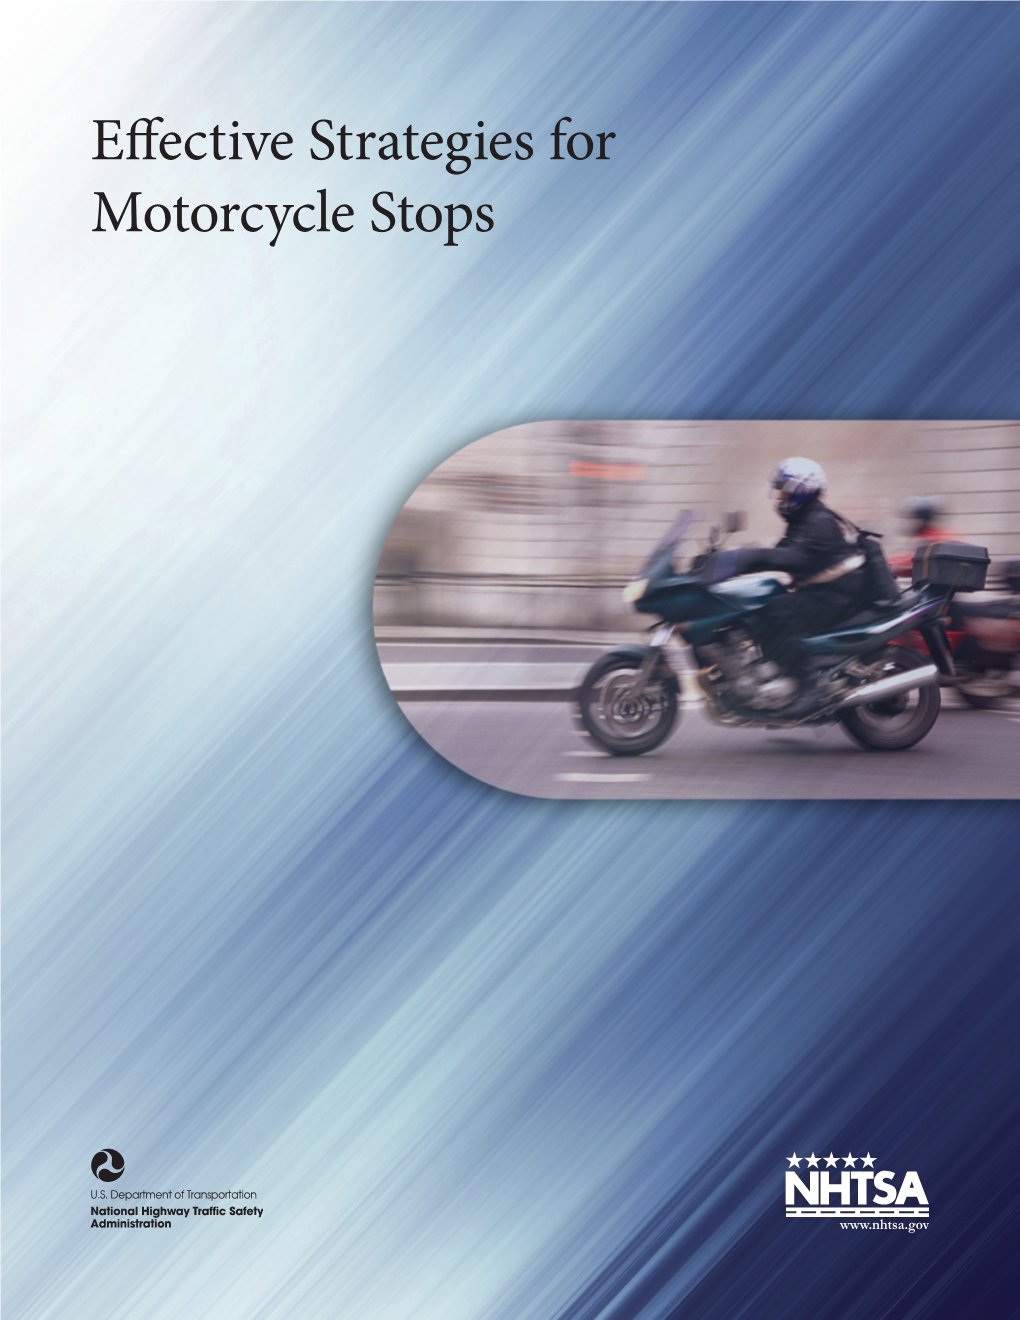 Effective Strategies for Motorcycle Stops